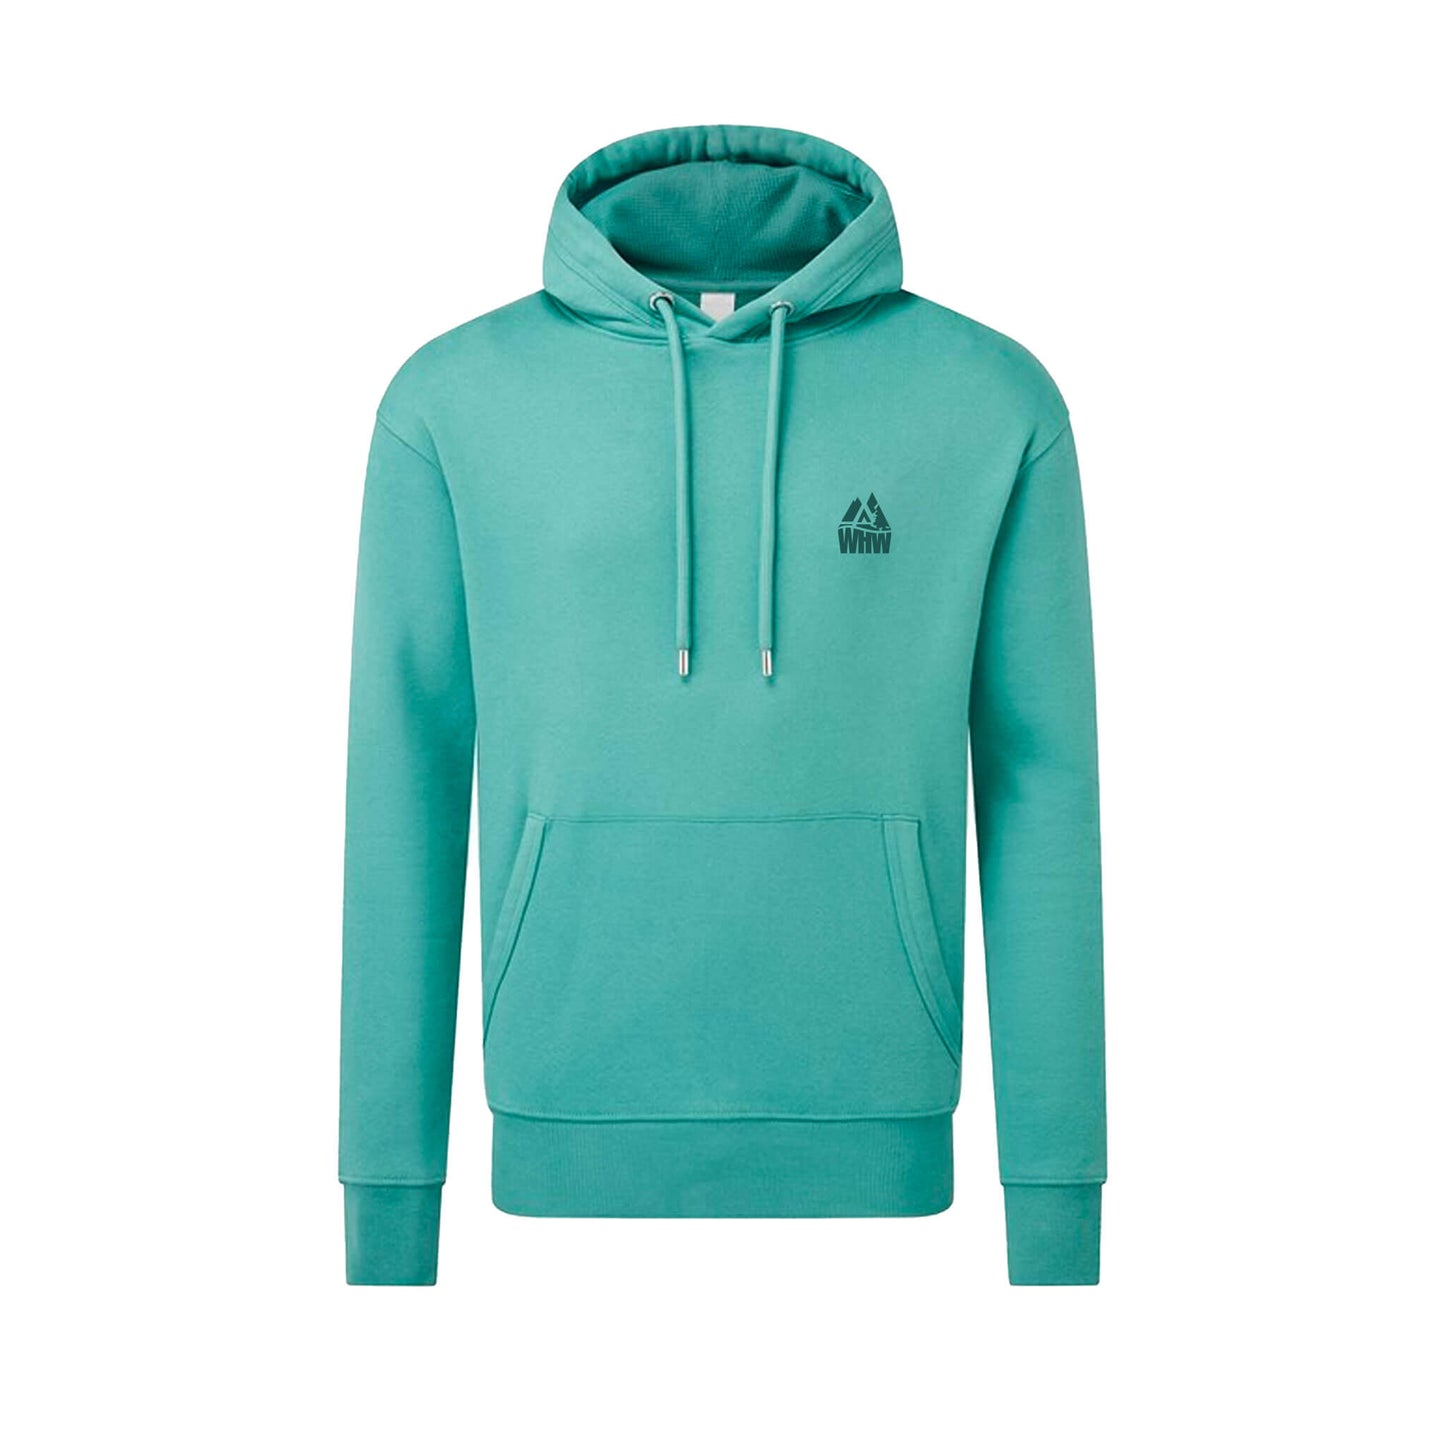 Mountain Organic Cotton Hoodie - Teal - Front View - West Highland Way